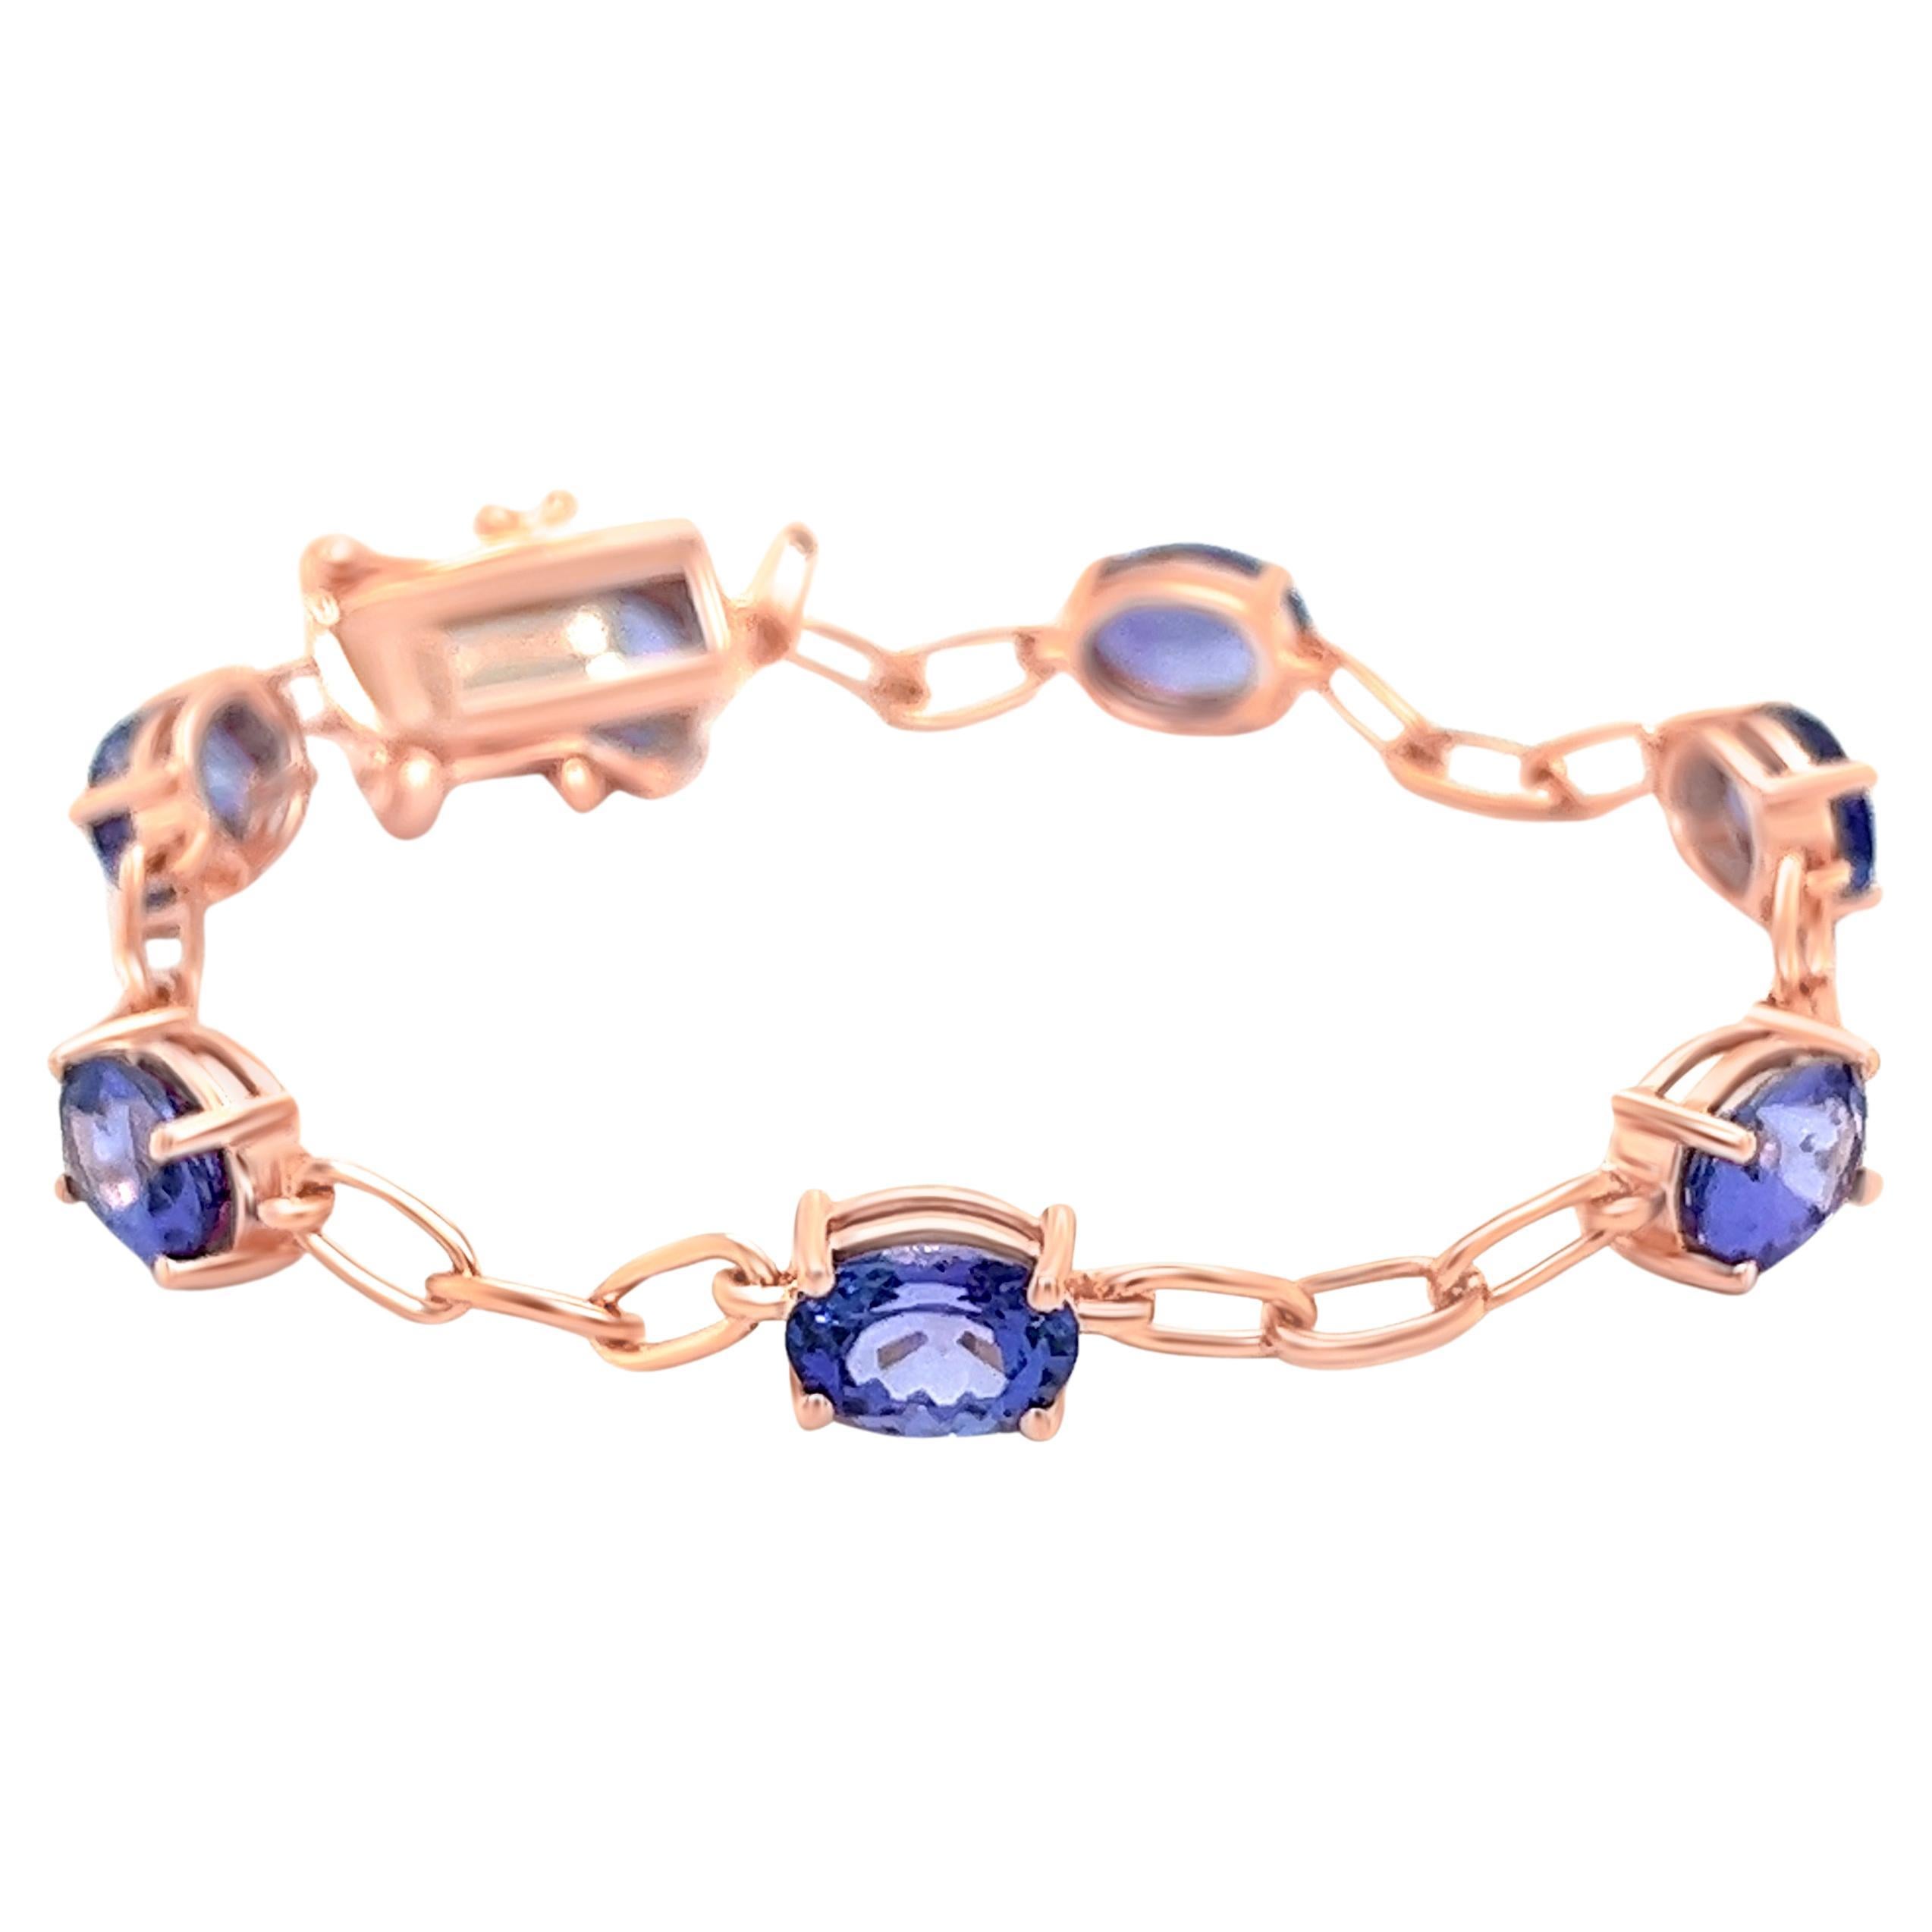 7.85 Carats Natural Tanzanite & Cubic Zirconia Bracelet For Women Jewelry  For Sale